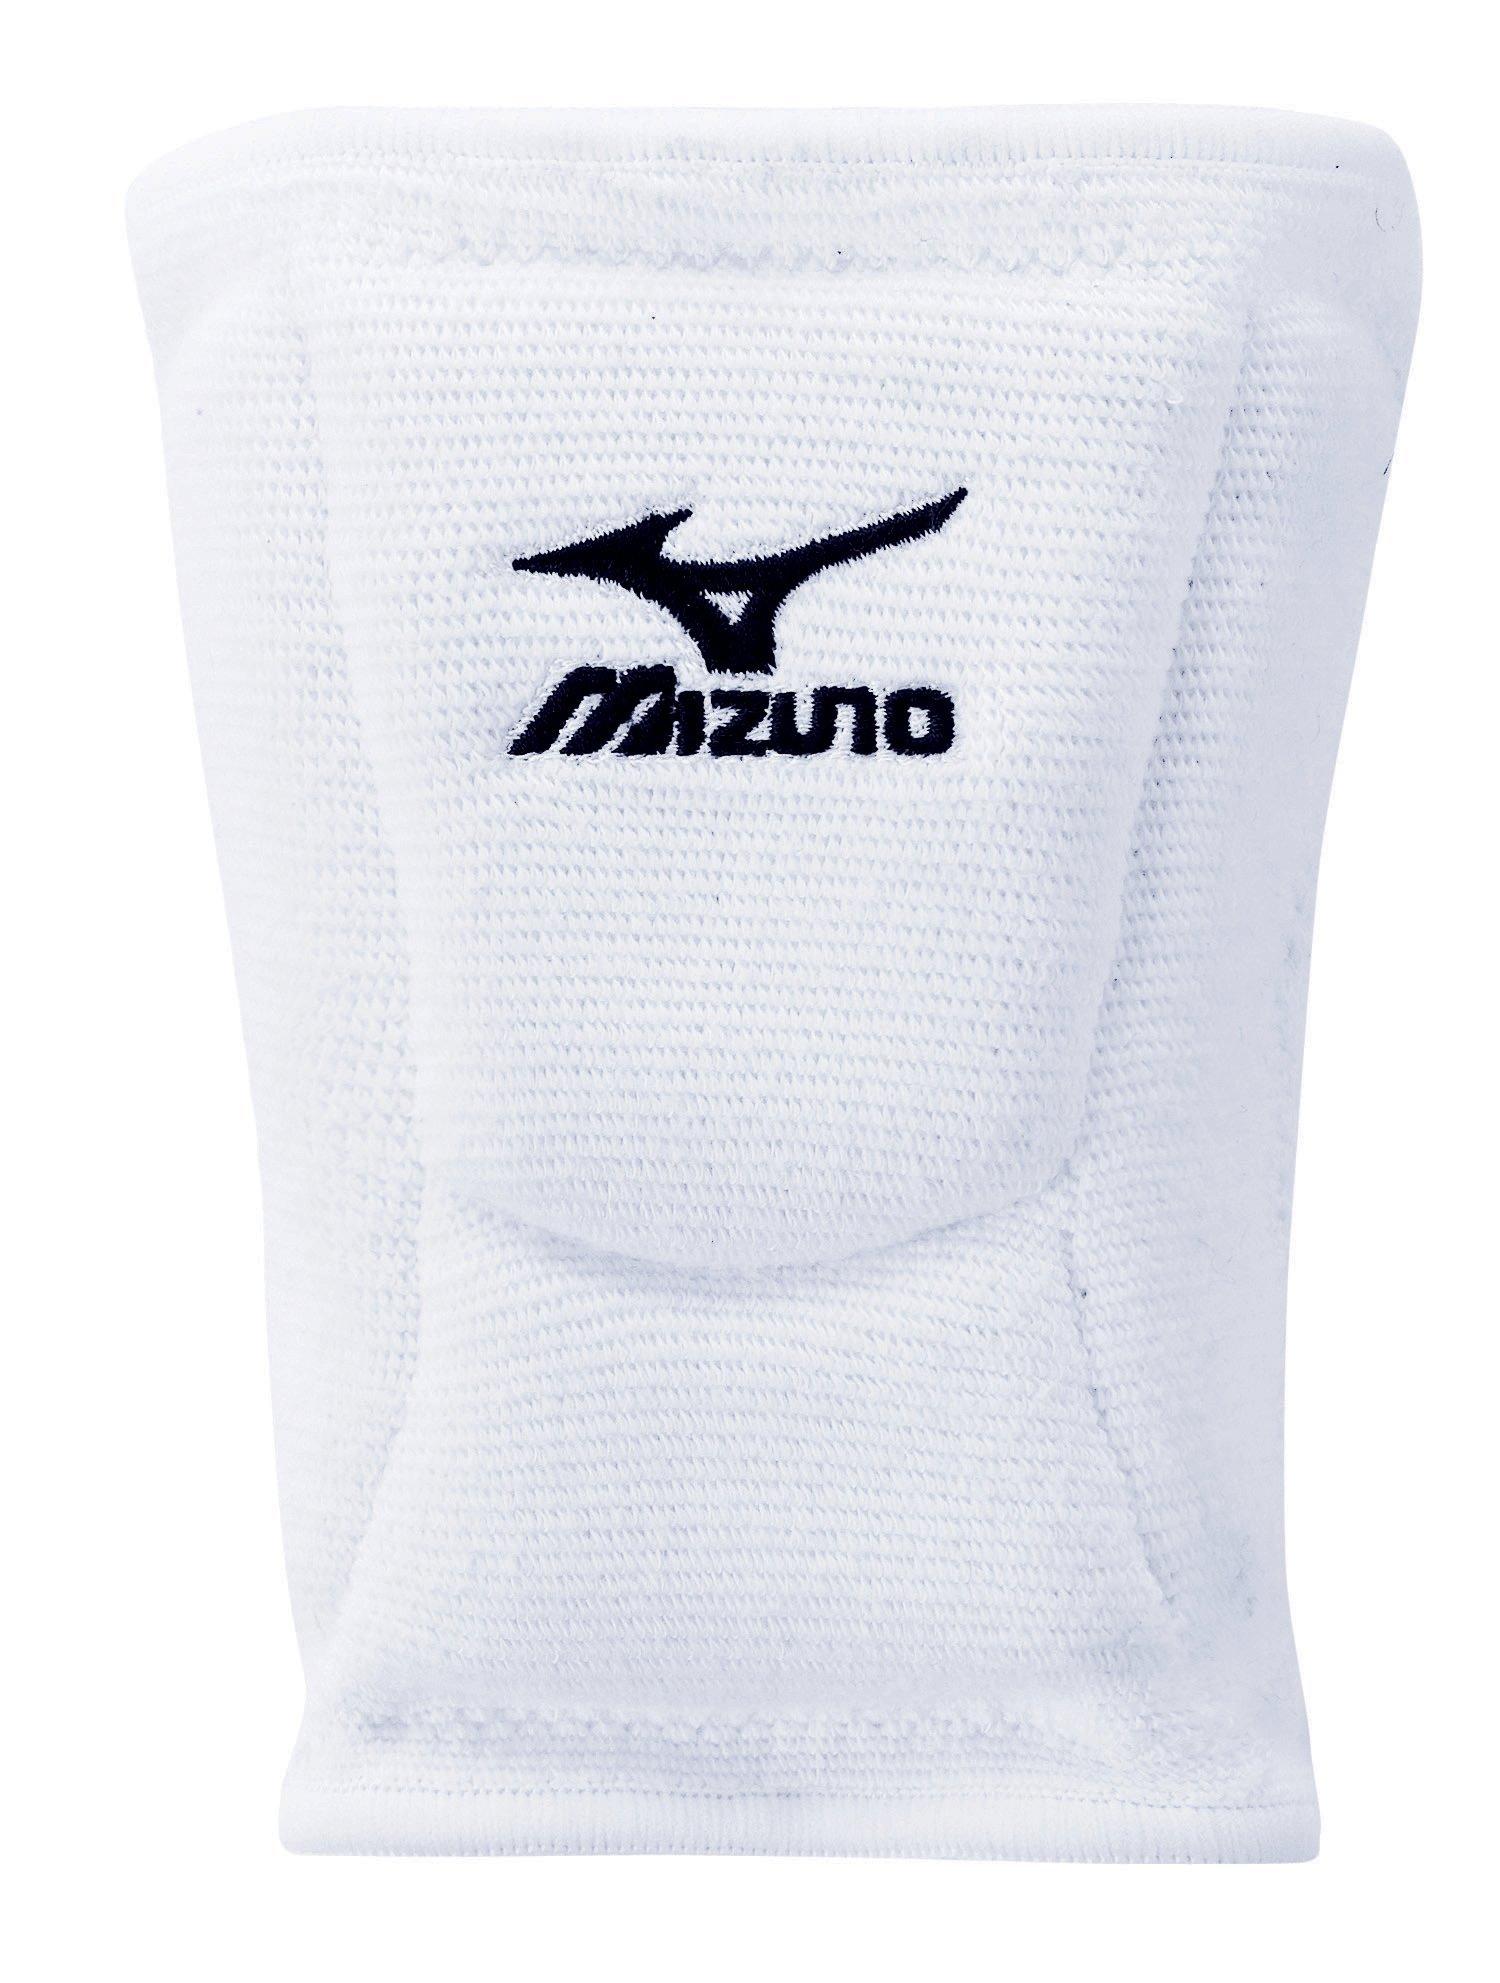 Low Profile Knee Pad for Volleyball 